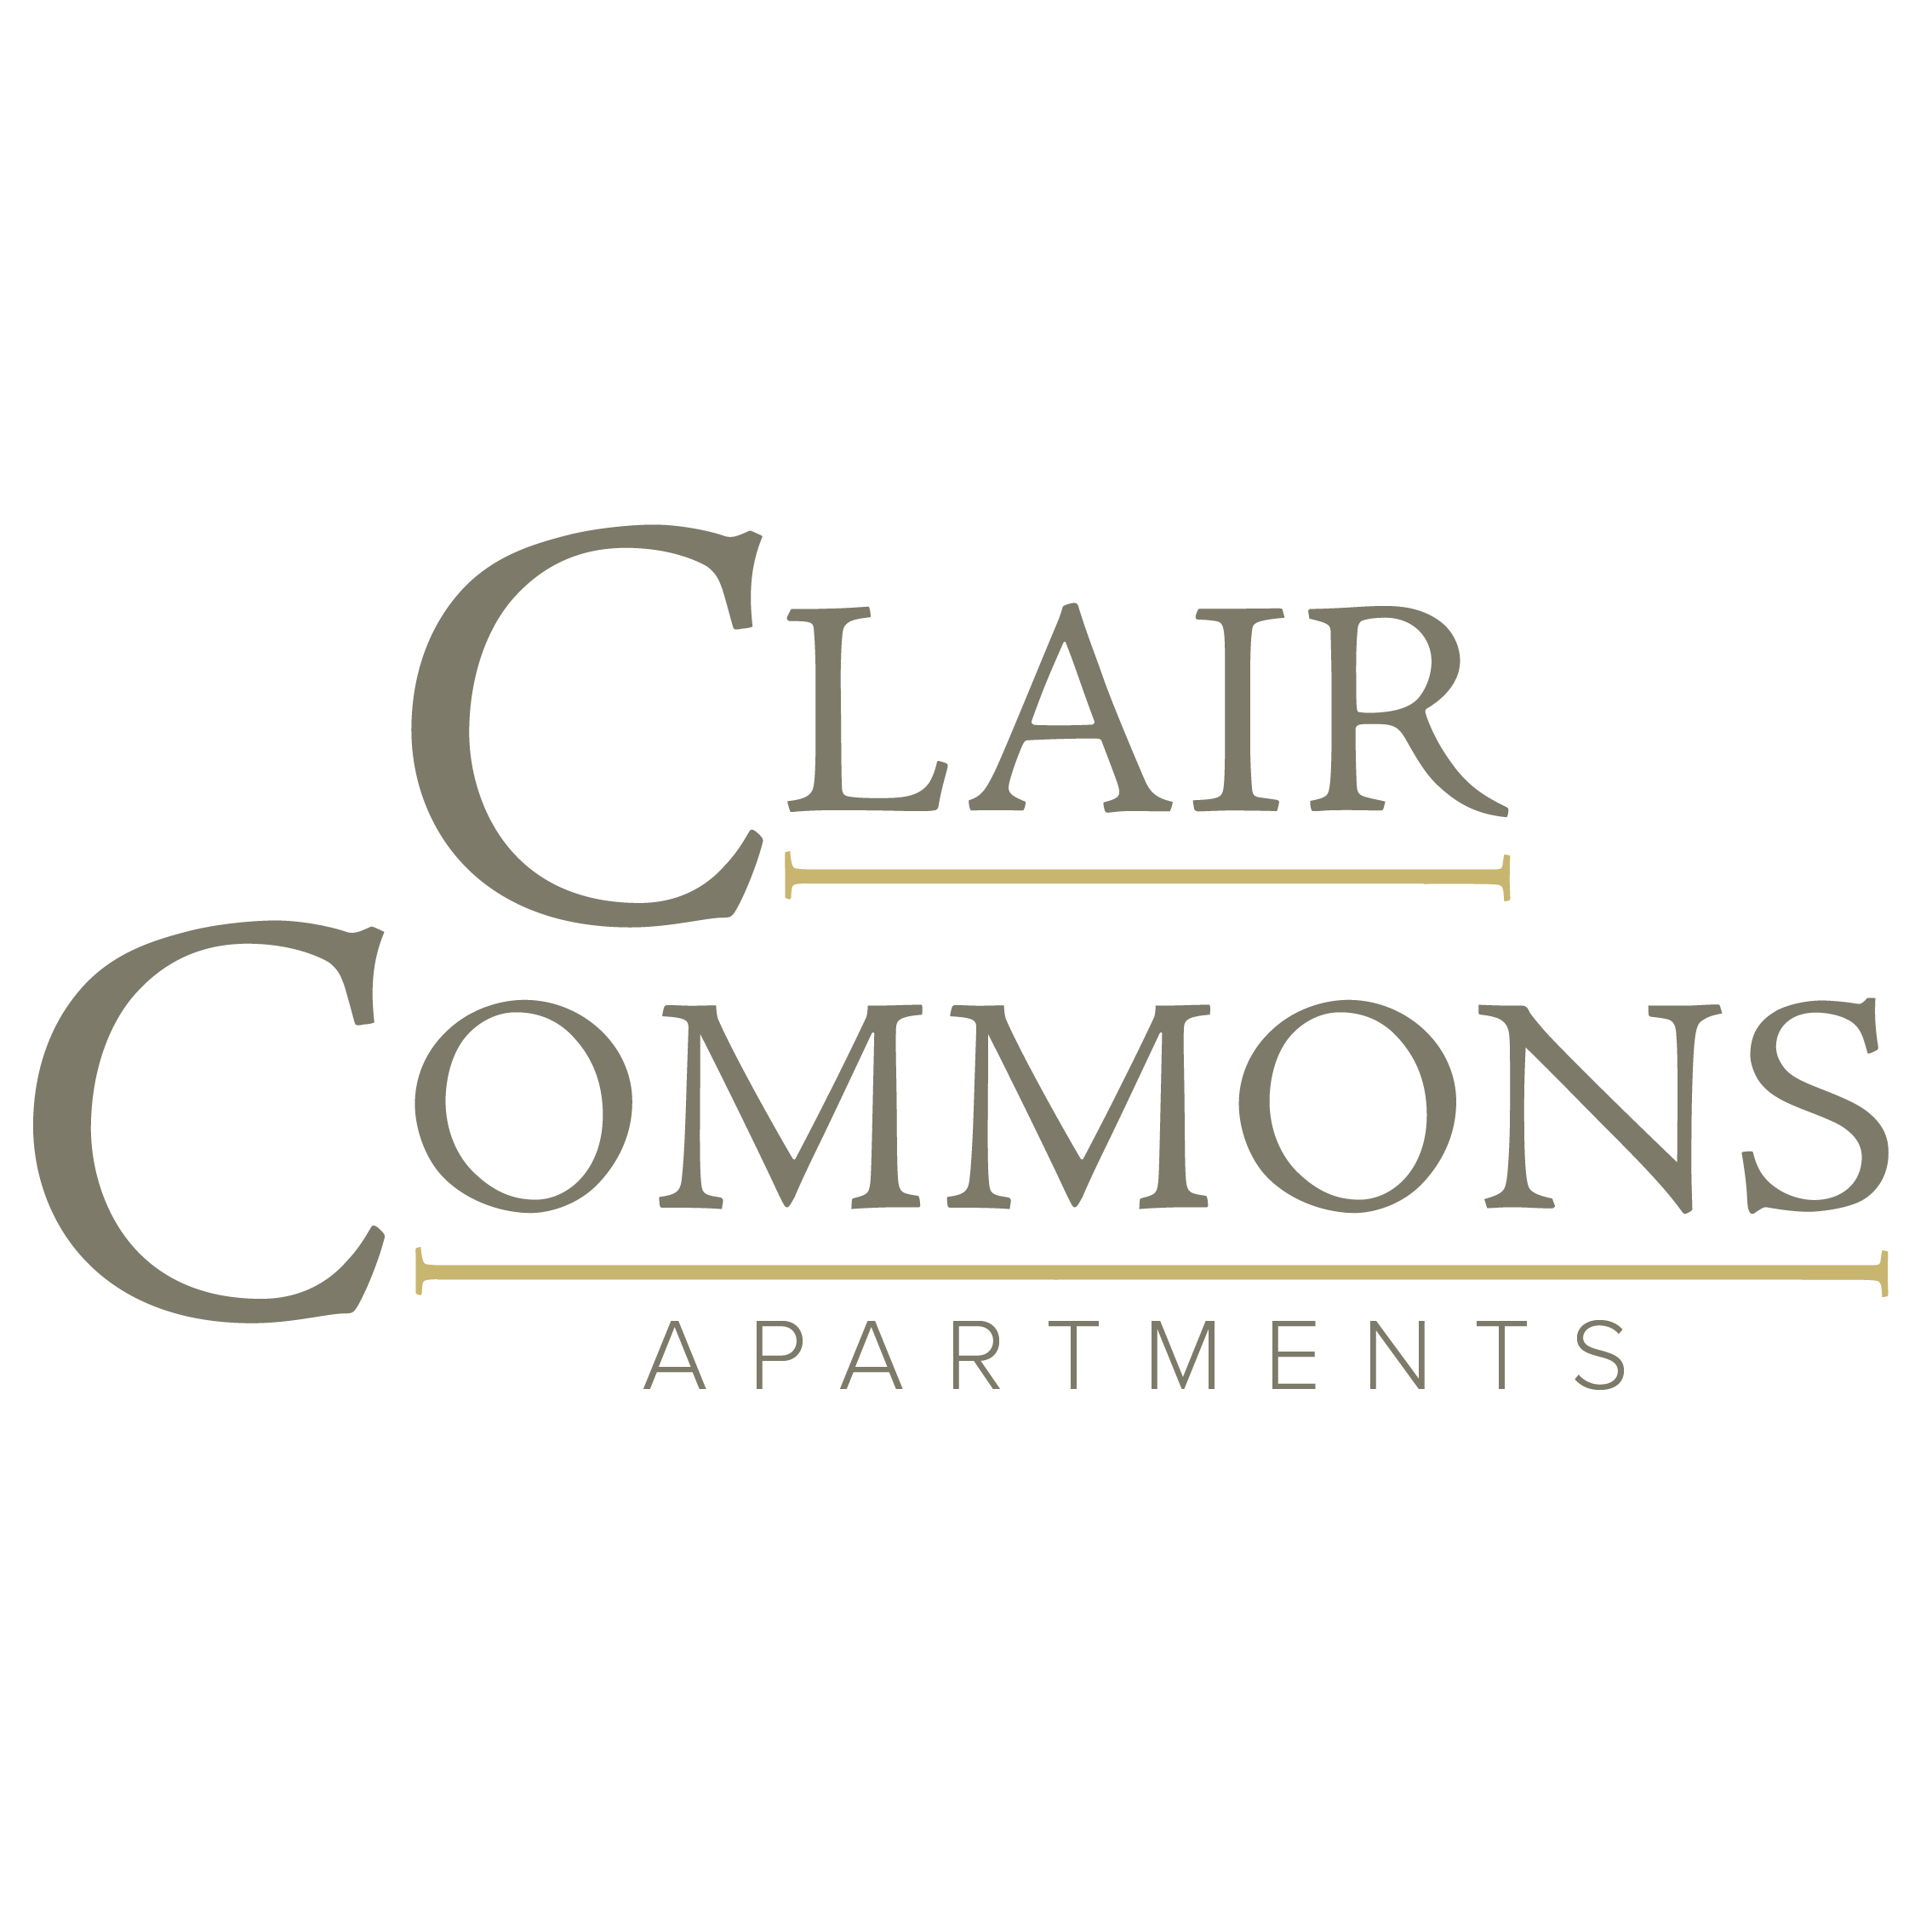 Clair Commons Apartments